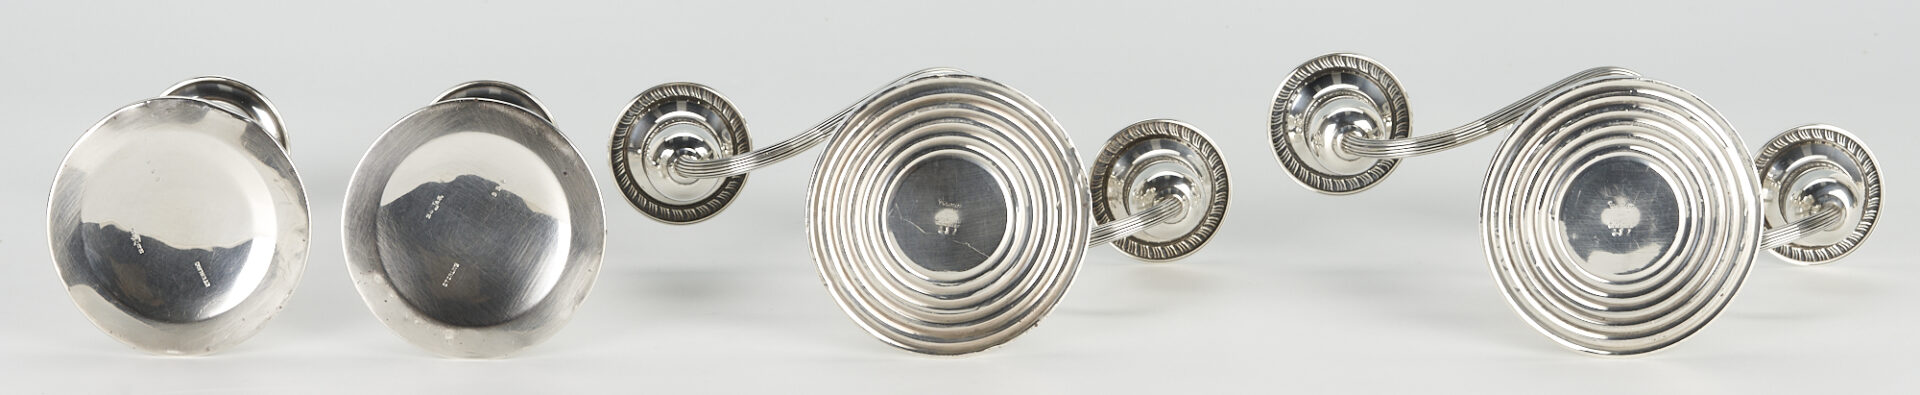 Lot 180: 7 Sterling Silver Hollowware Items